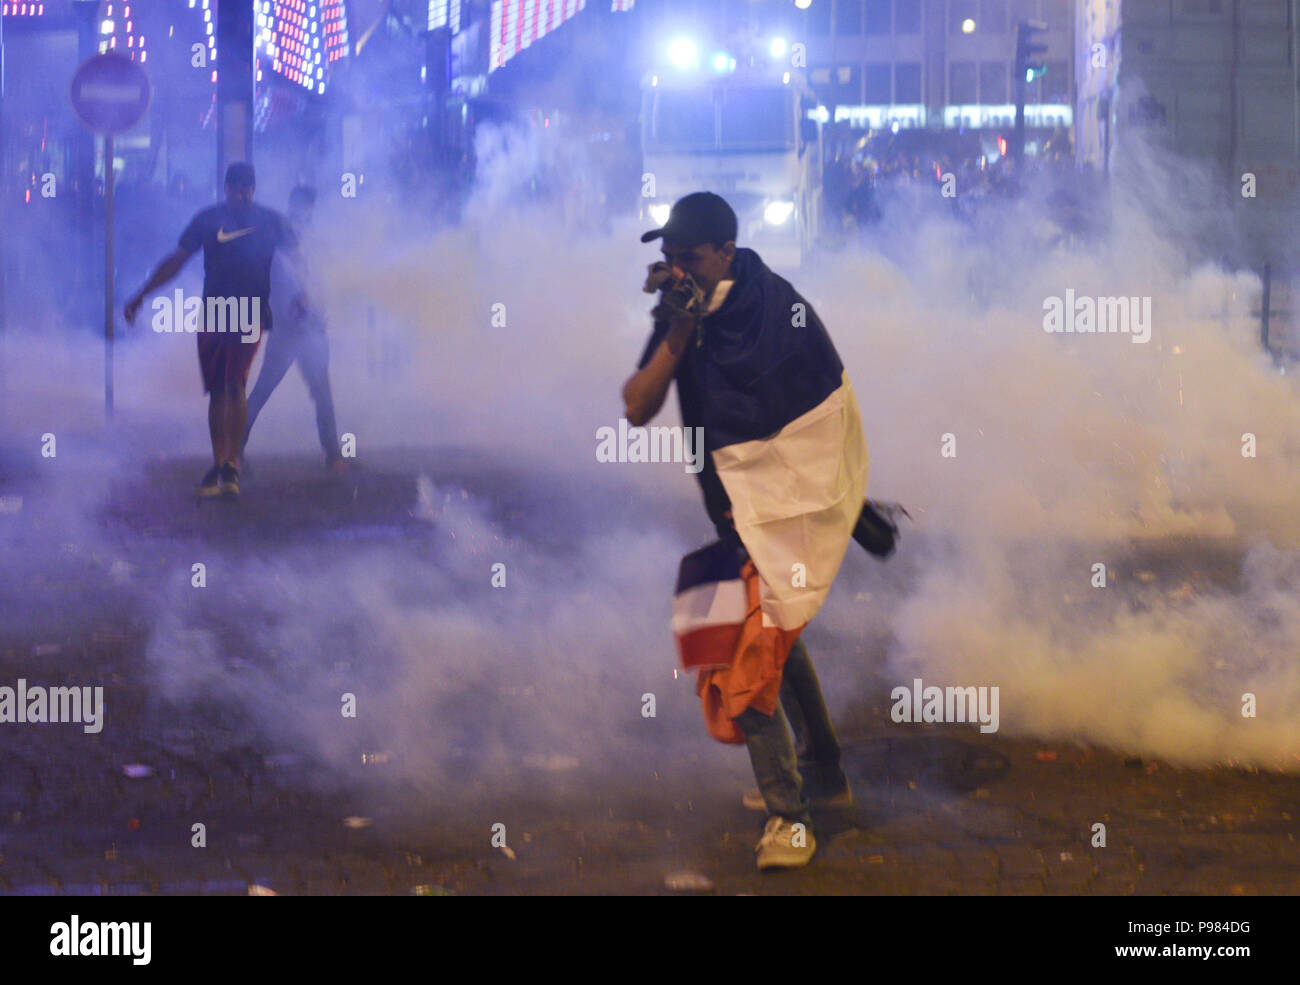 Paris, France. 15th July 2018.French supporters leave the Champs-Elysees avenue after riot police fired tear gas to disperse groups of violent youths. France won the World Cup by beating Croatia 4-2 in the final. Des supporters quittent les Champs-Elysees apres que la police ait utilise des gaz lacrymogenes afin de disperser des groupes violents, suite a la victoire de la France en Coupe du Monde. *** FRANCE OUT / NO SALES TO FRENCH MEDIA *** Credit: Idealink Photography/Alamy Live News Stock Photo